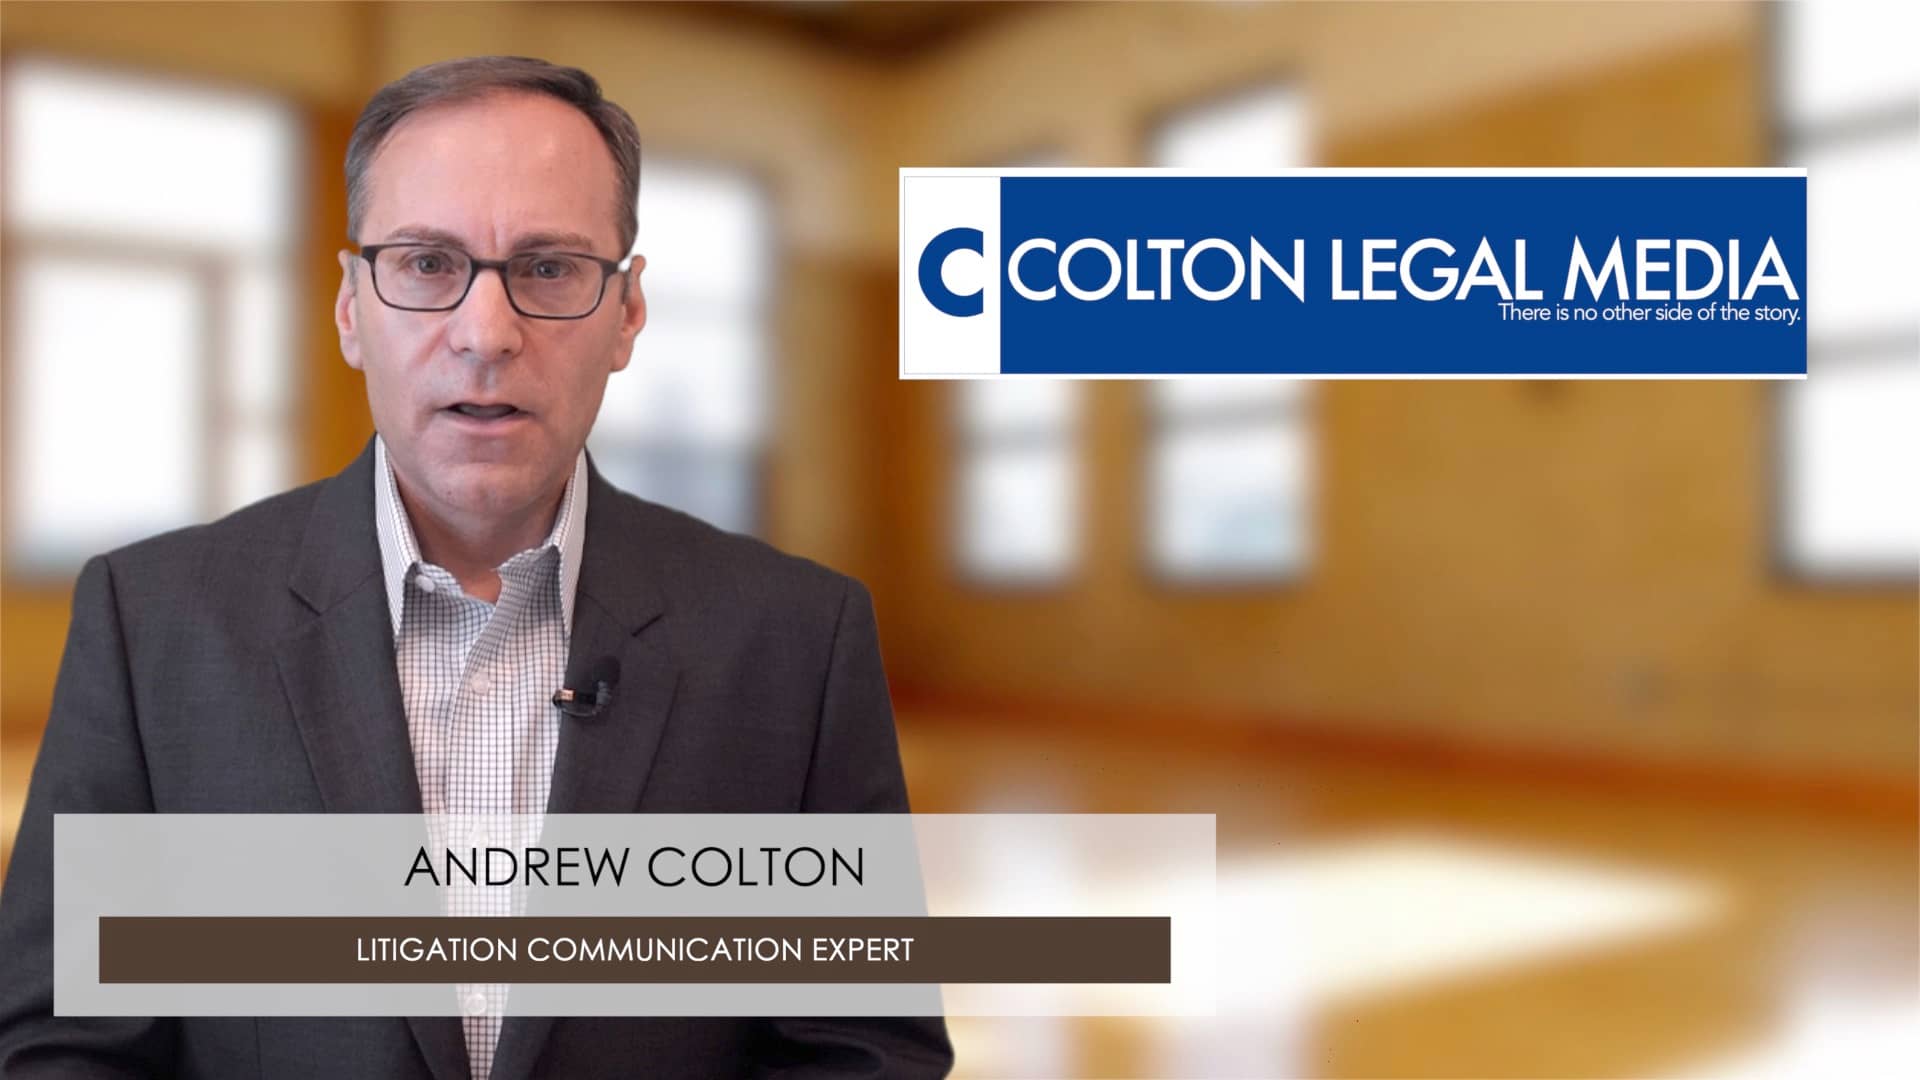 ANDREW COLTON LEGAL VIDEO
